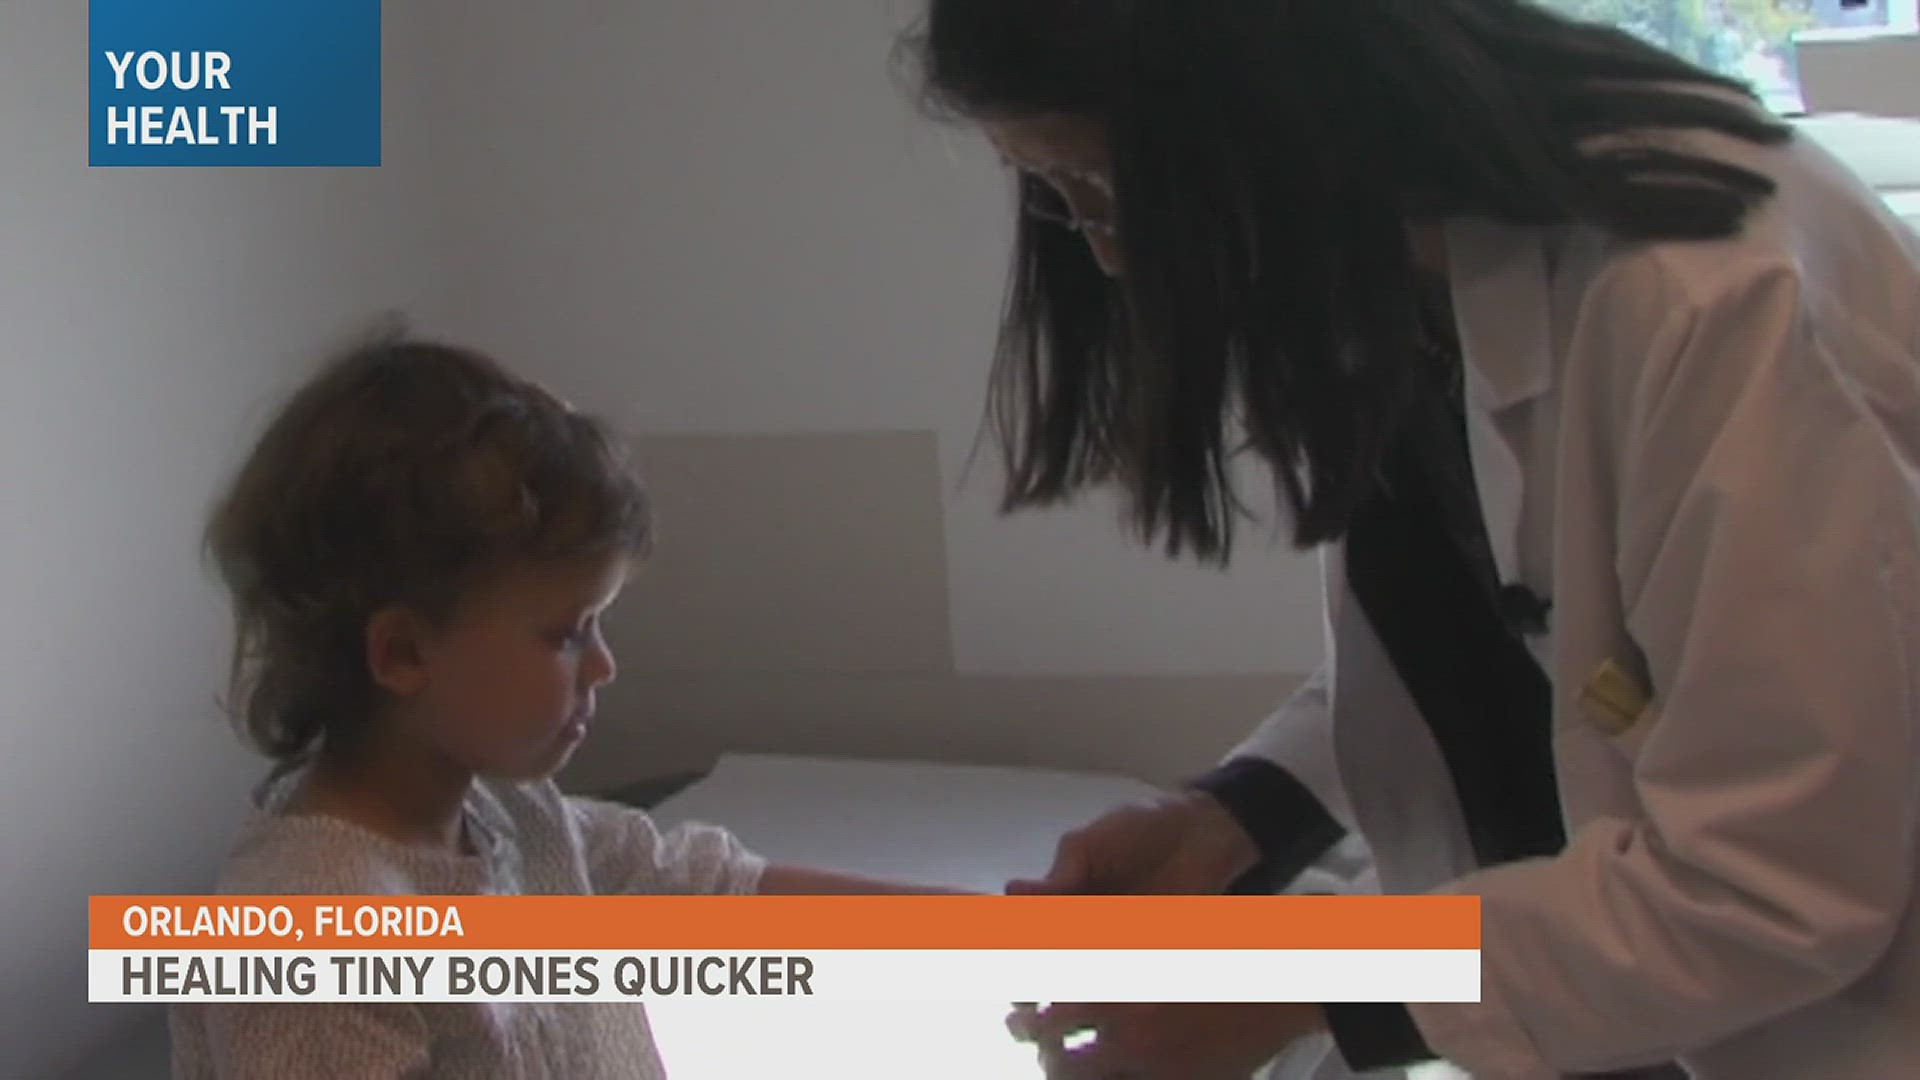 Surgeons in Florida have been researching composite implants for kids who break bones. These implants would reduce the number of surgeries a child would need.